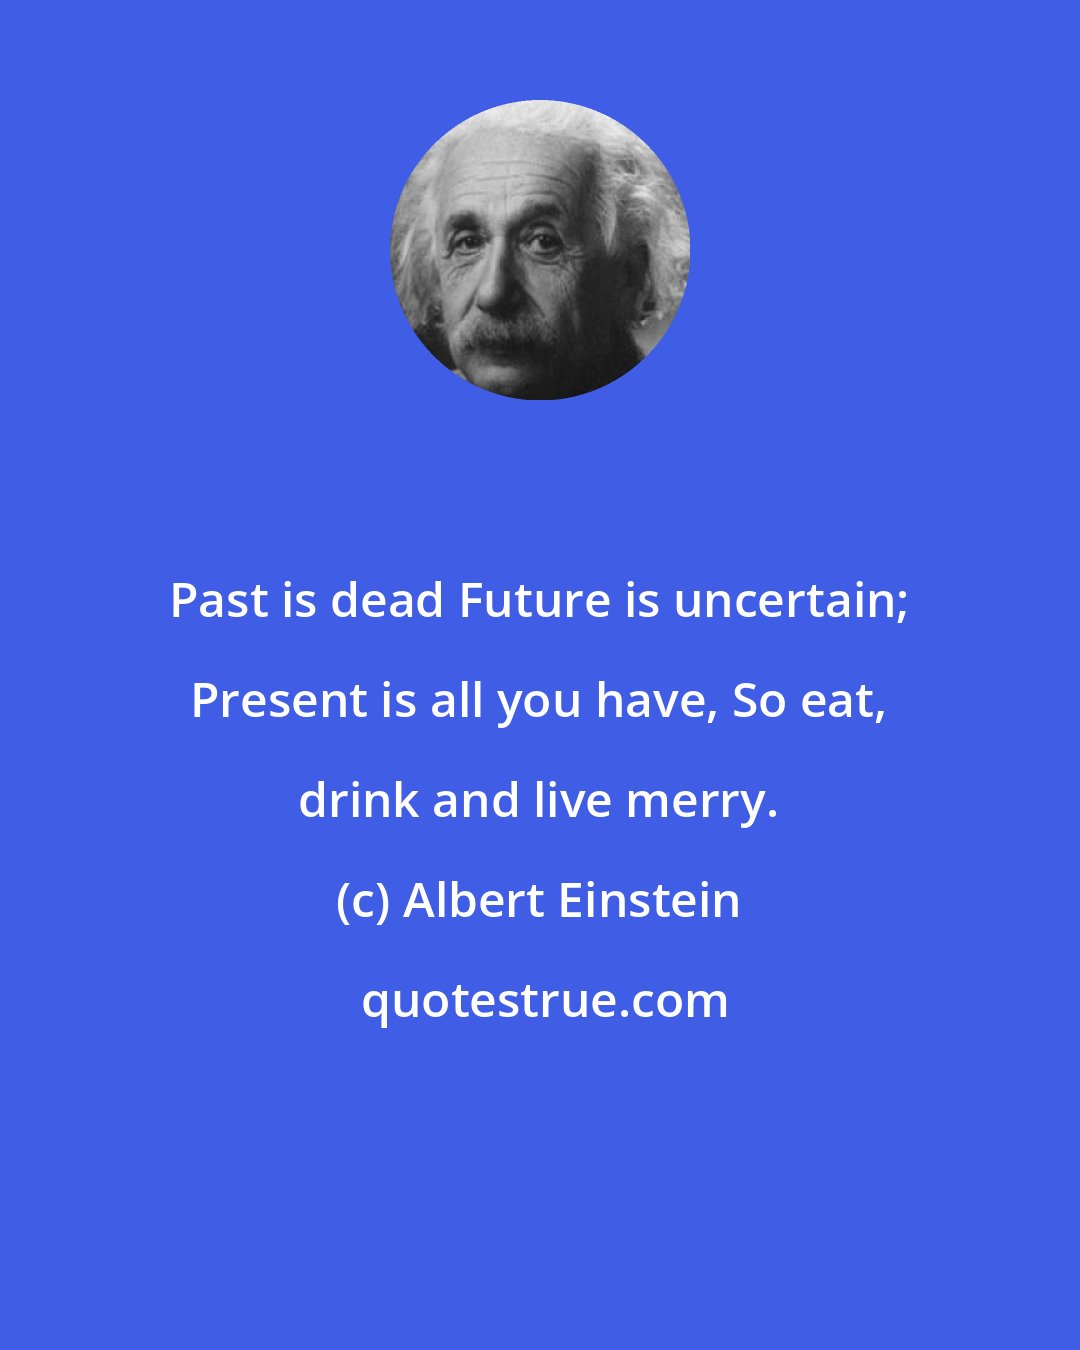 Albert Einstein: Past is dead Future is uncertain; Present is all you have, So eat, drink and live merry.